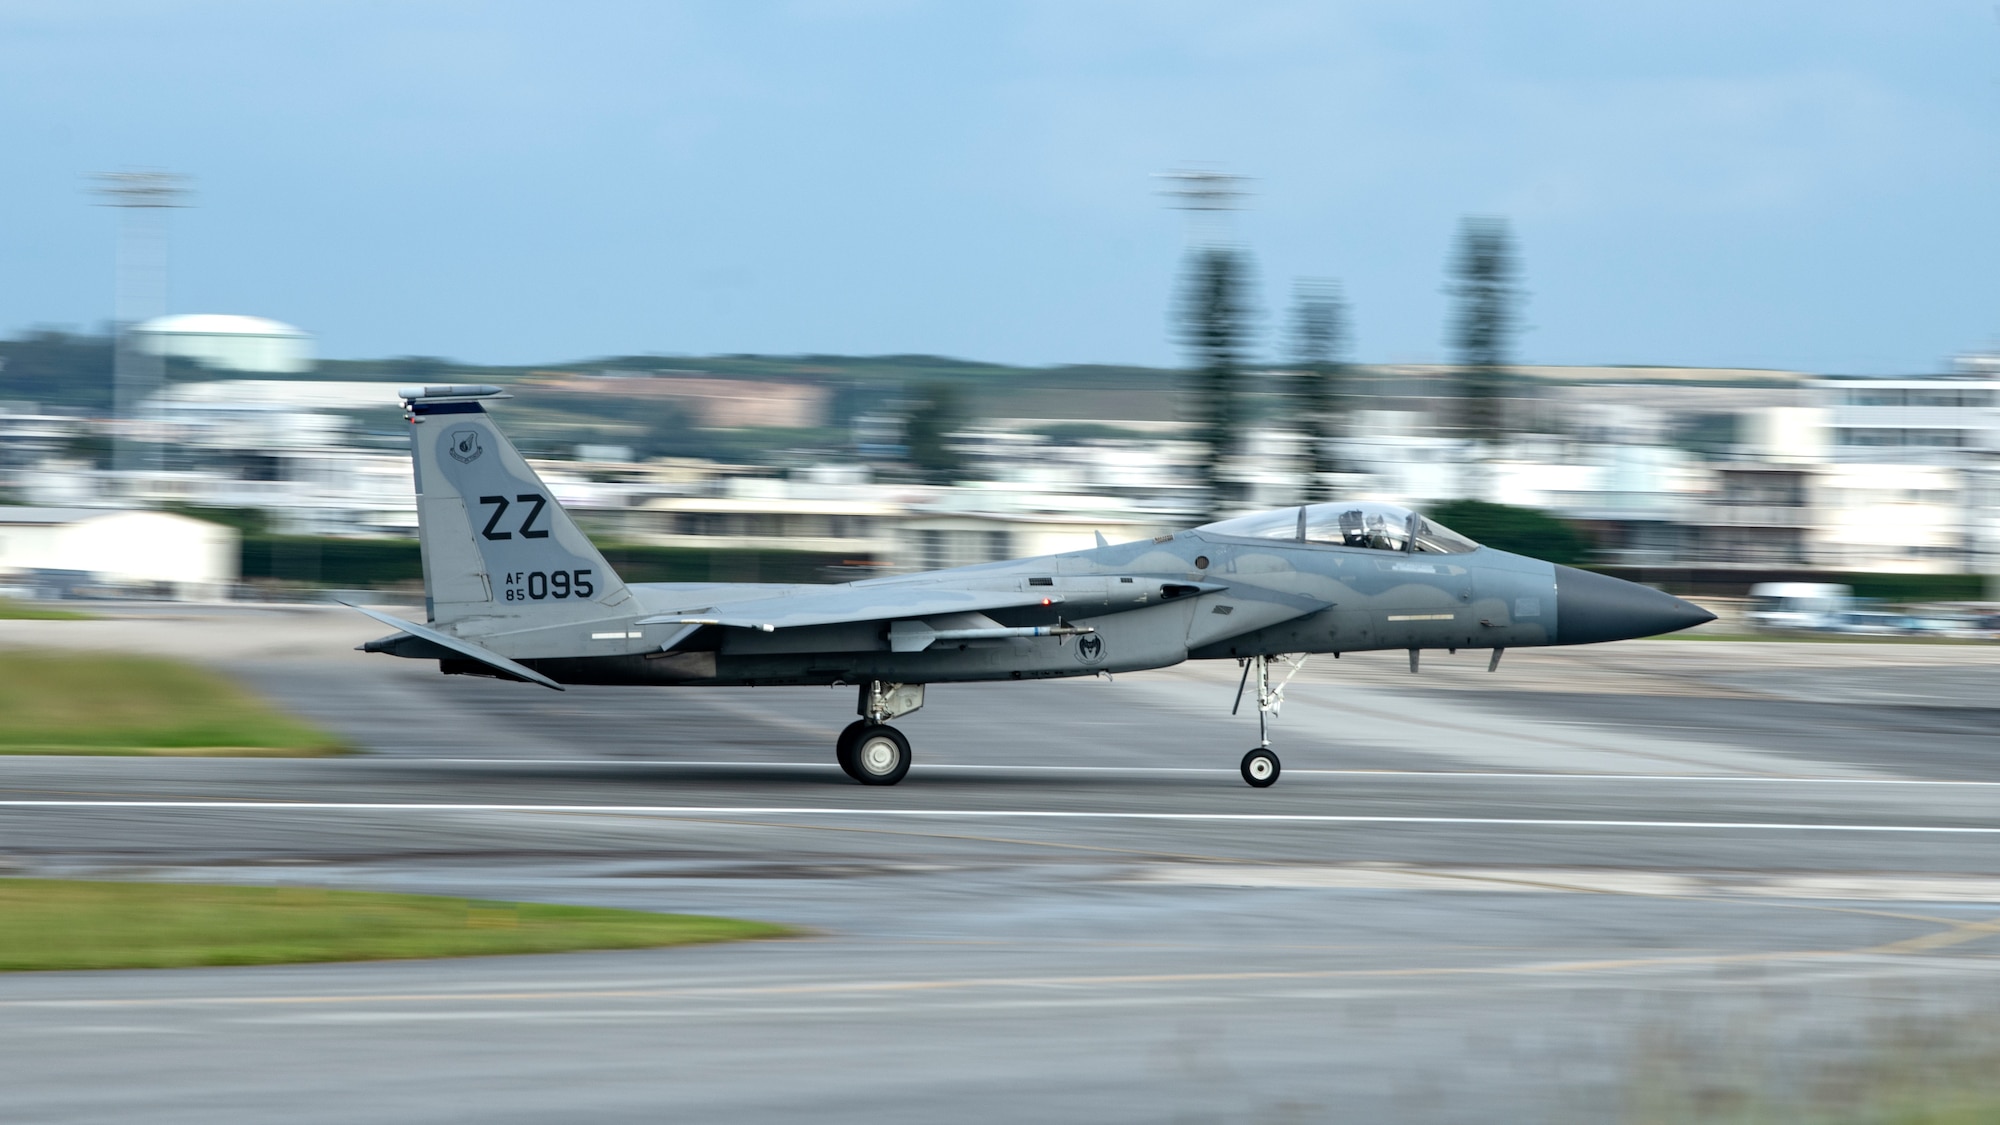 A U.S. Air Force F-15C Eagle assigned to the 44th Fighter Squadron takes off during a super surge exercise at Kadena Air Base, Japan, Oct. 19, 2021. Surge operations are designed to simulate a fast-paced, deployed combat environment to ensure aircrew and support personnel are always ready to execute missions in defense of the U.S. and its allies. (U.S. Air Force photo by Senior Airman Jessi Monte)